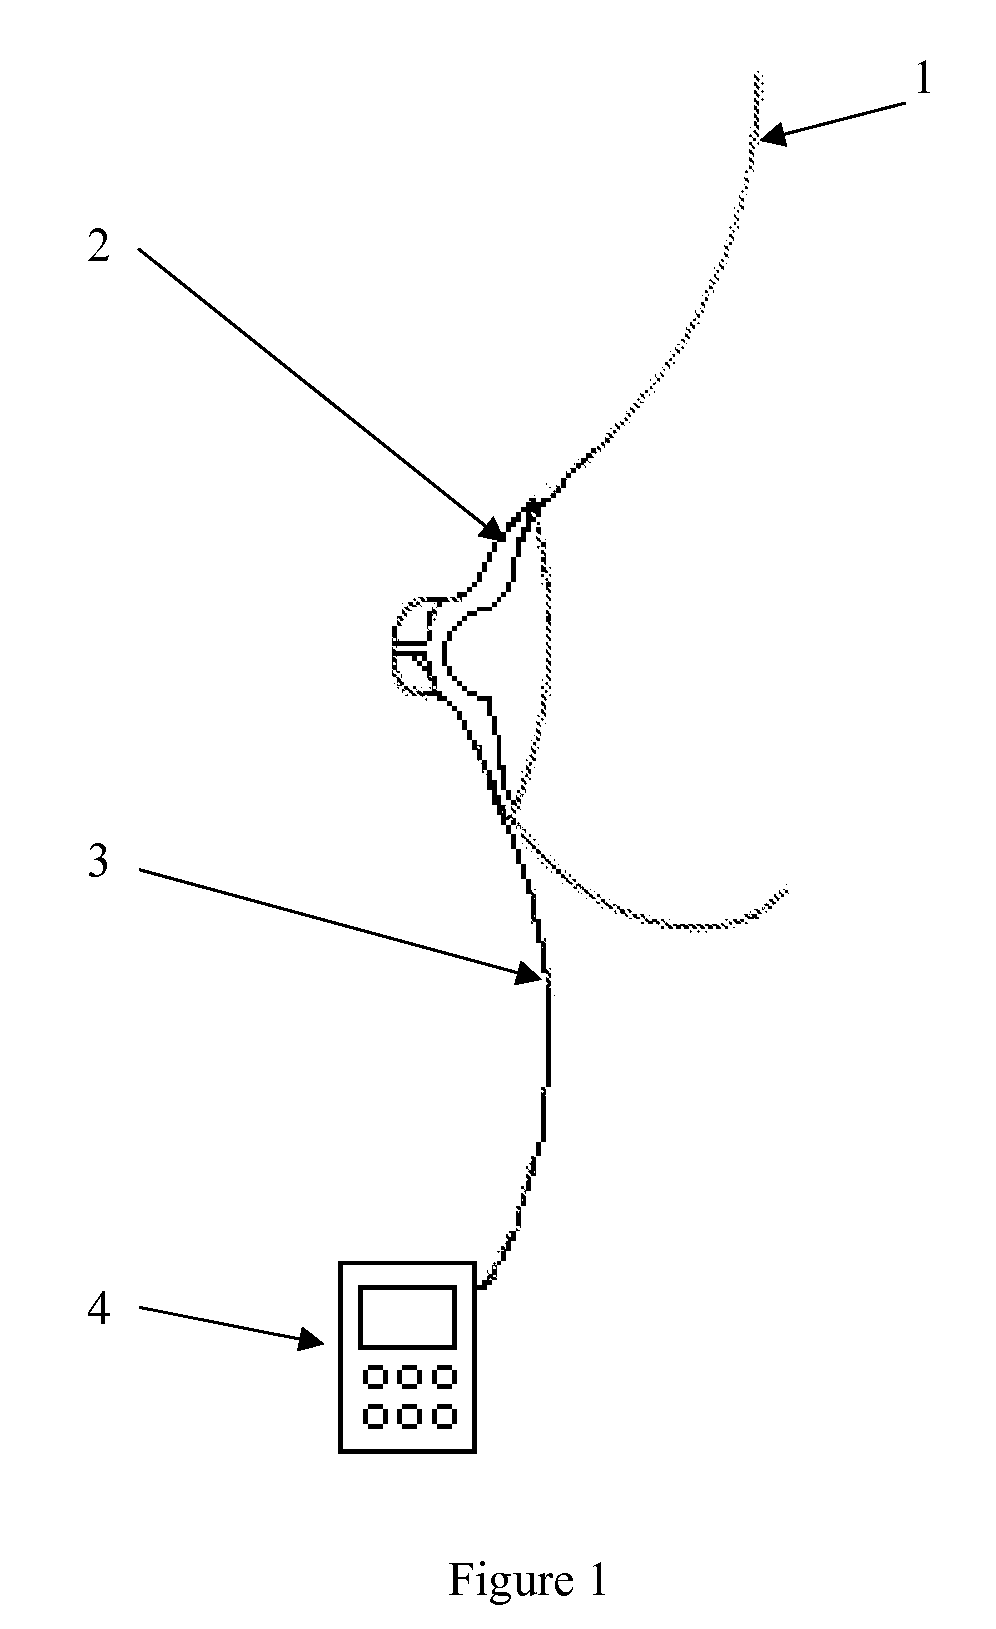 Apparatus For Determining the Amount of Milk Breast-Fed to a Baby by Convective Heat Transfer